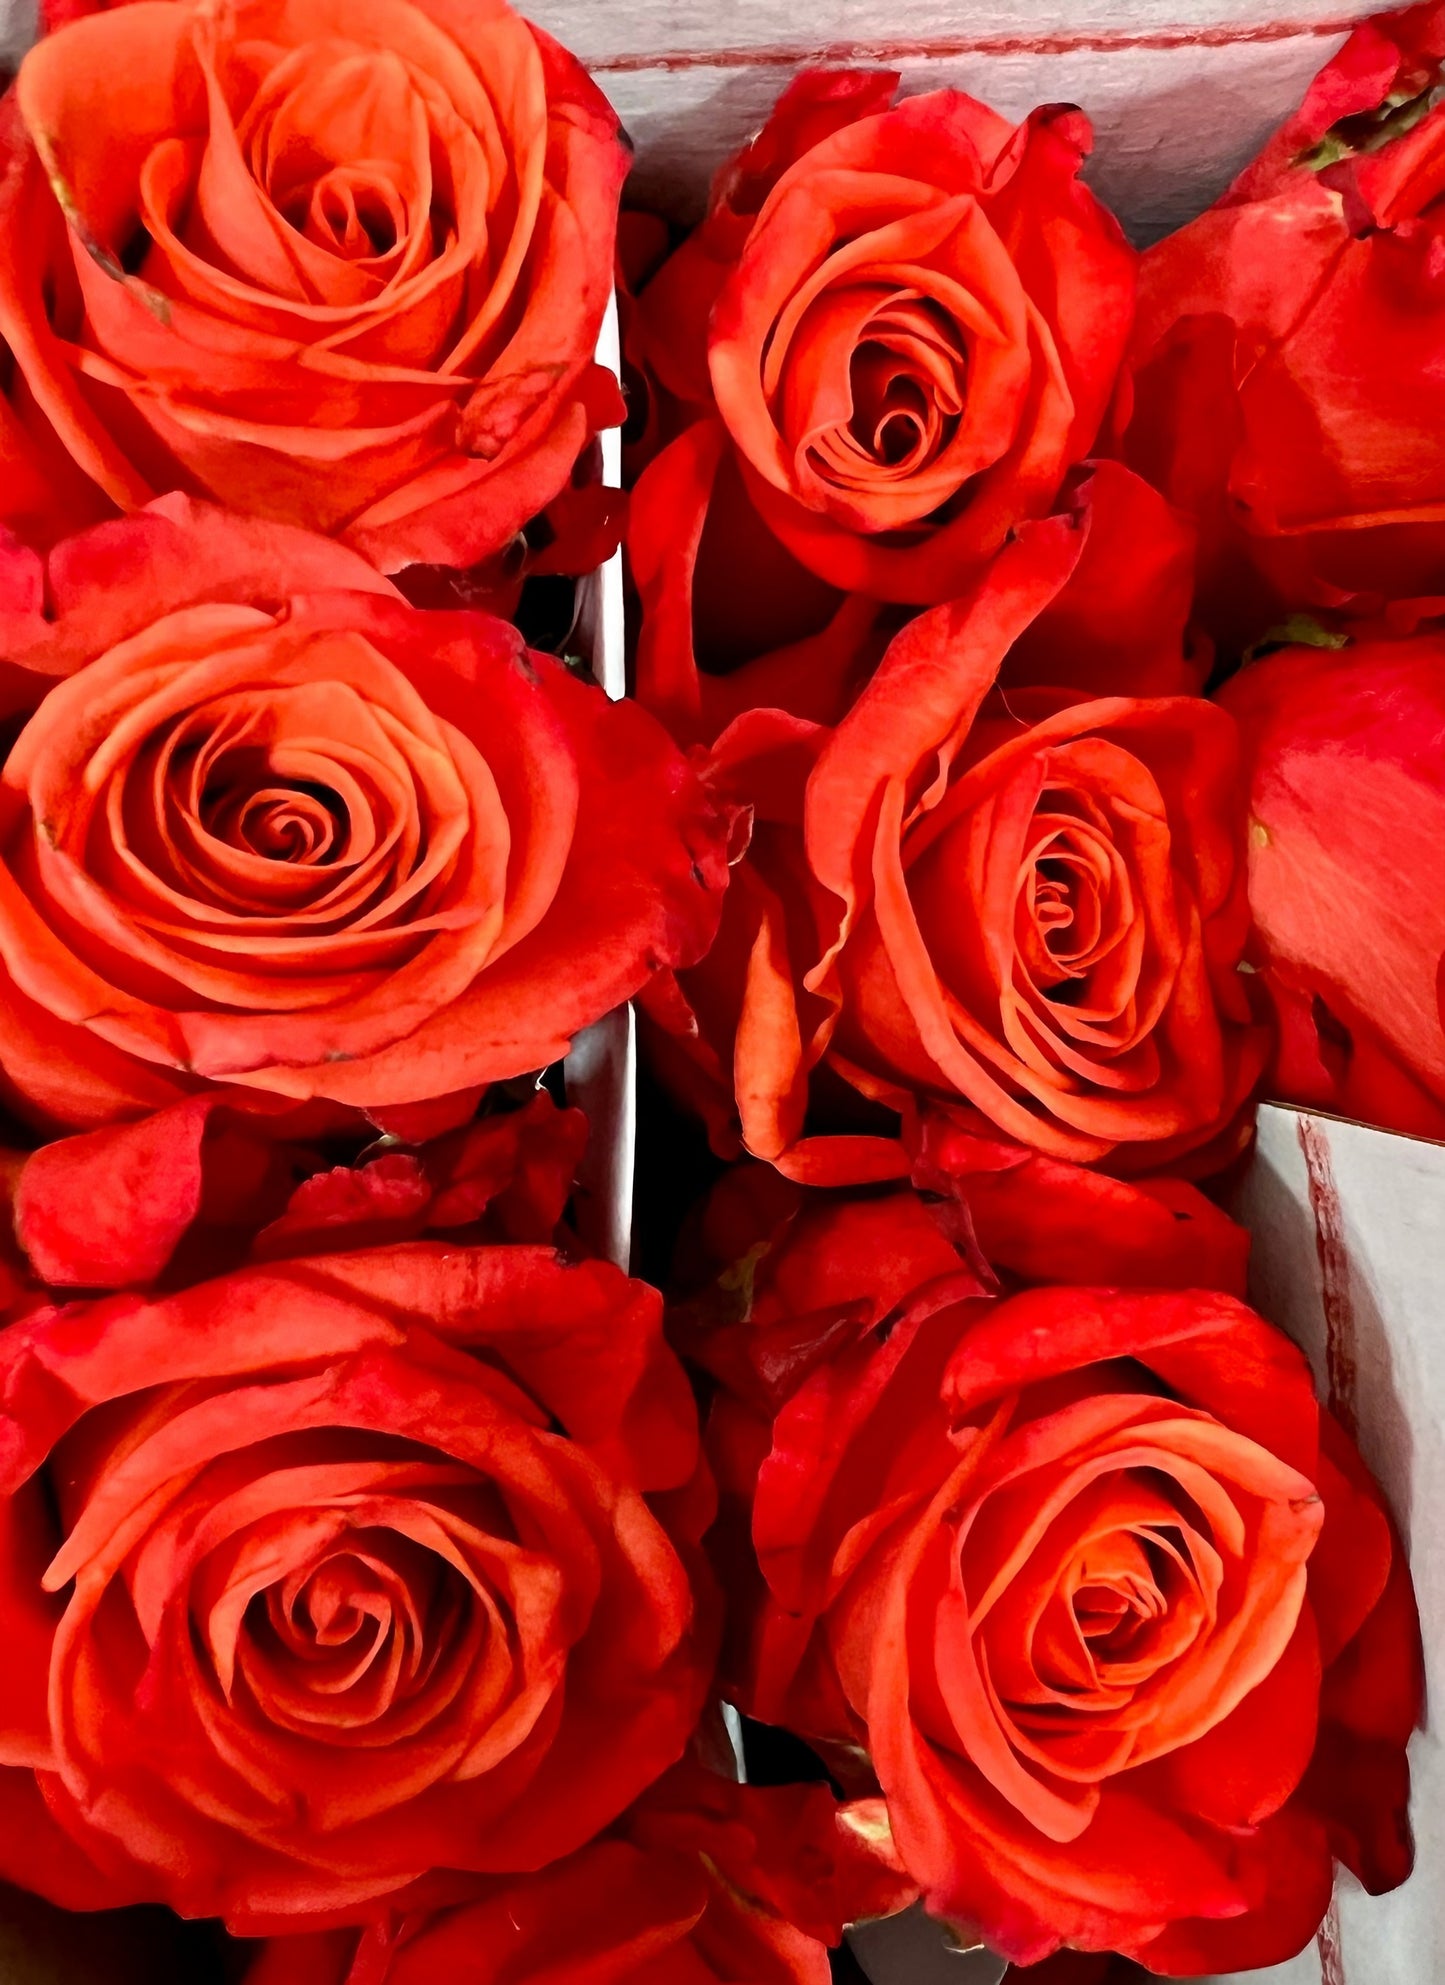 Love Story product showcasing red roses arranged in a box